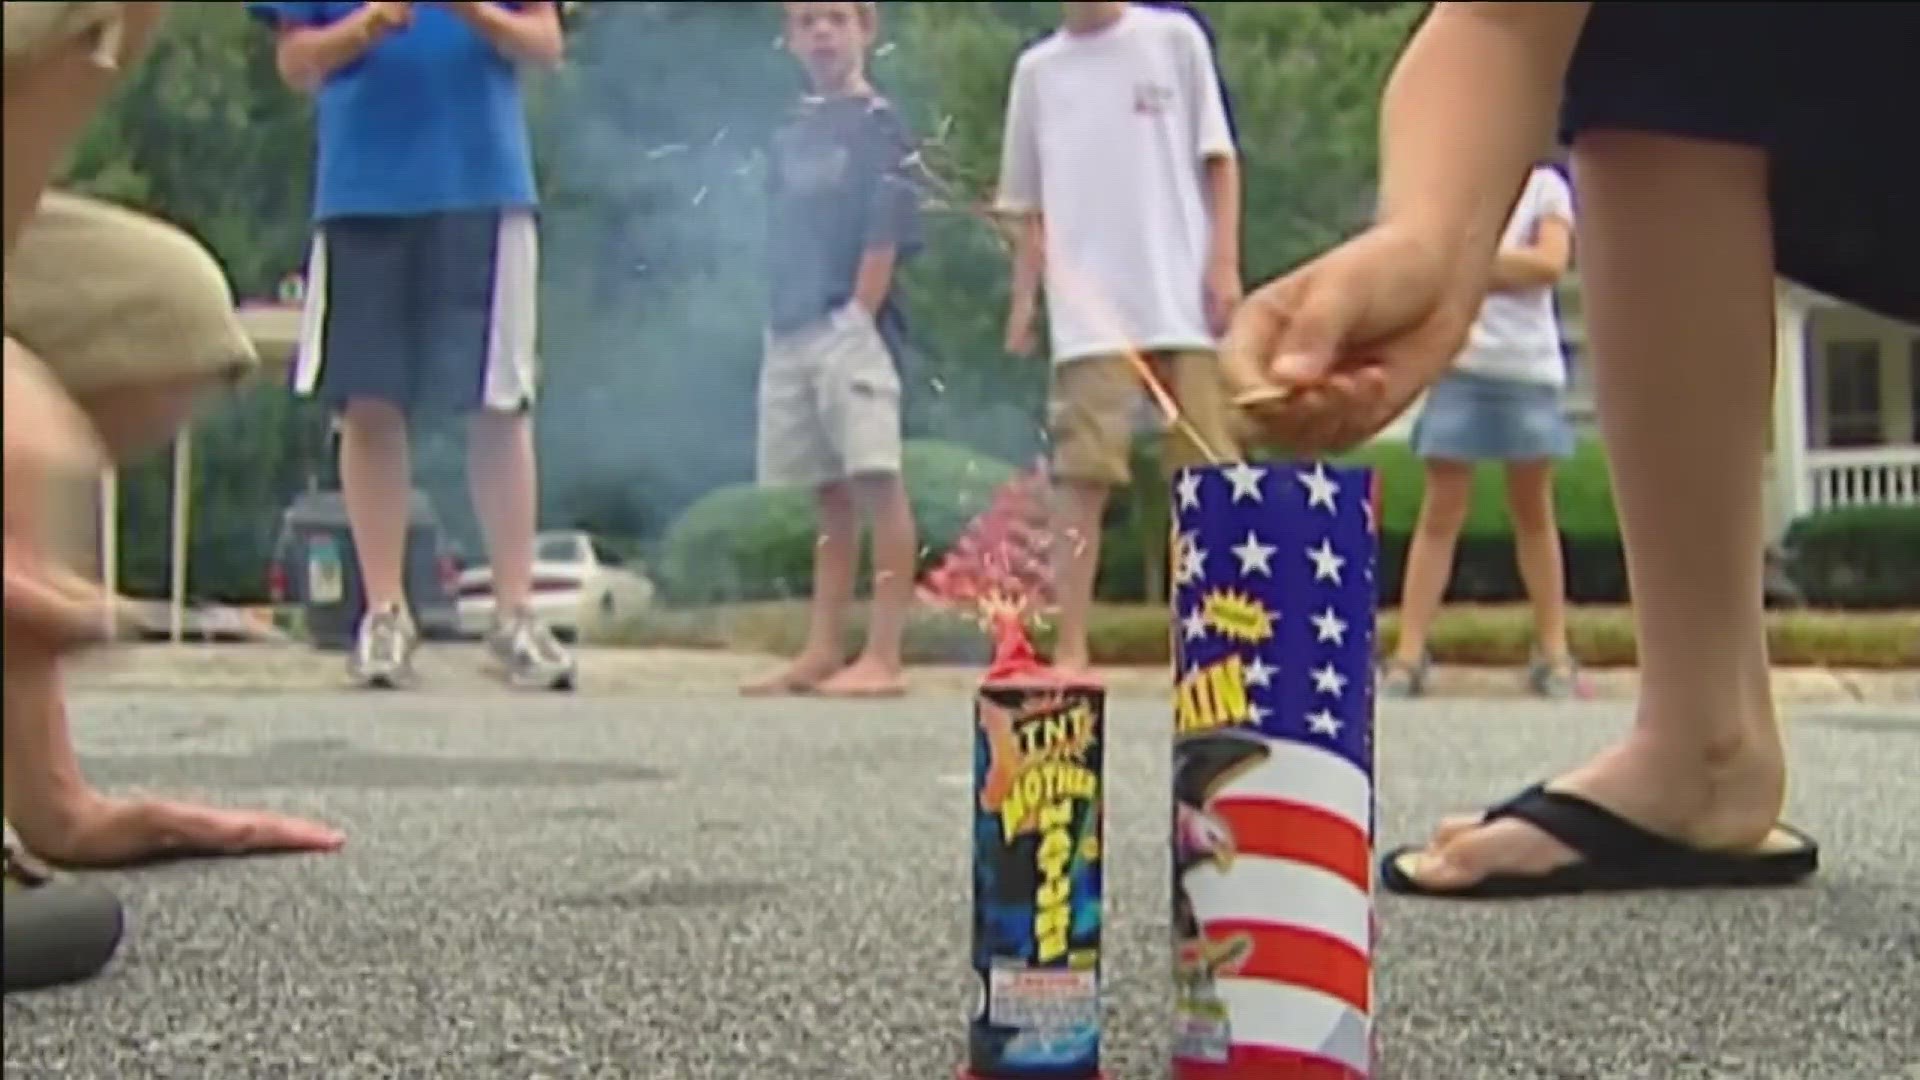 The only legal kind of fireworks you can use in Toledo are novelty items like poppers - smokes - snaps and sparklers.